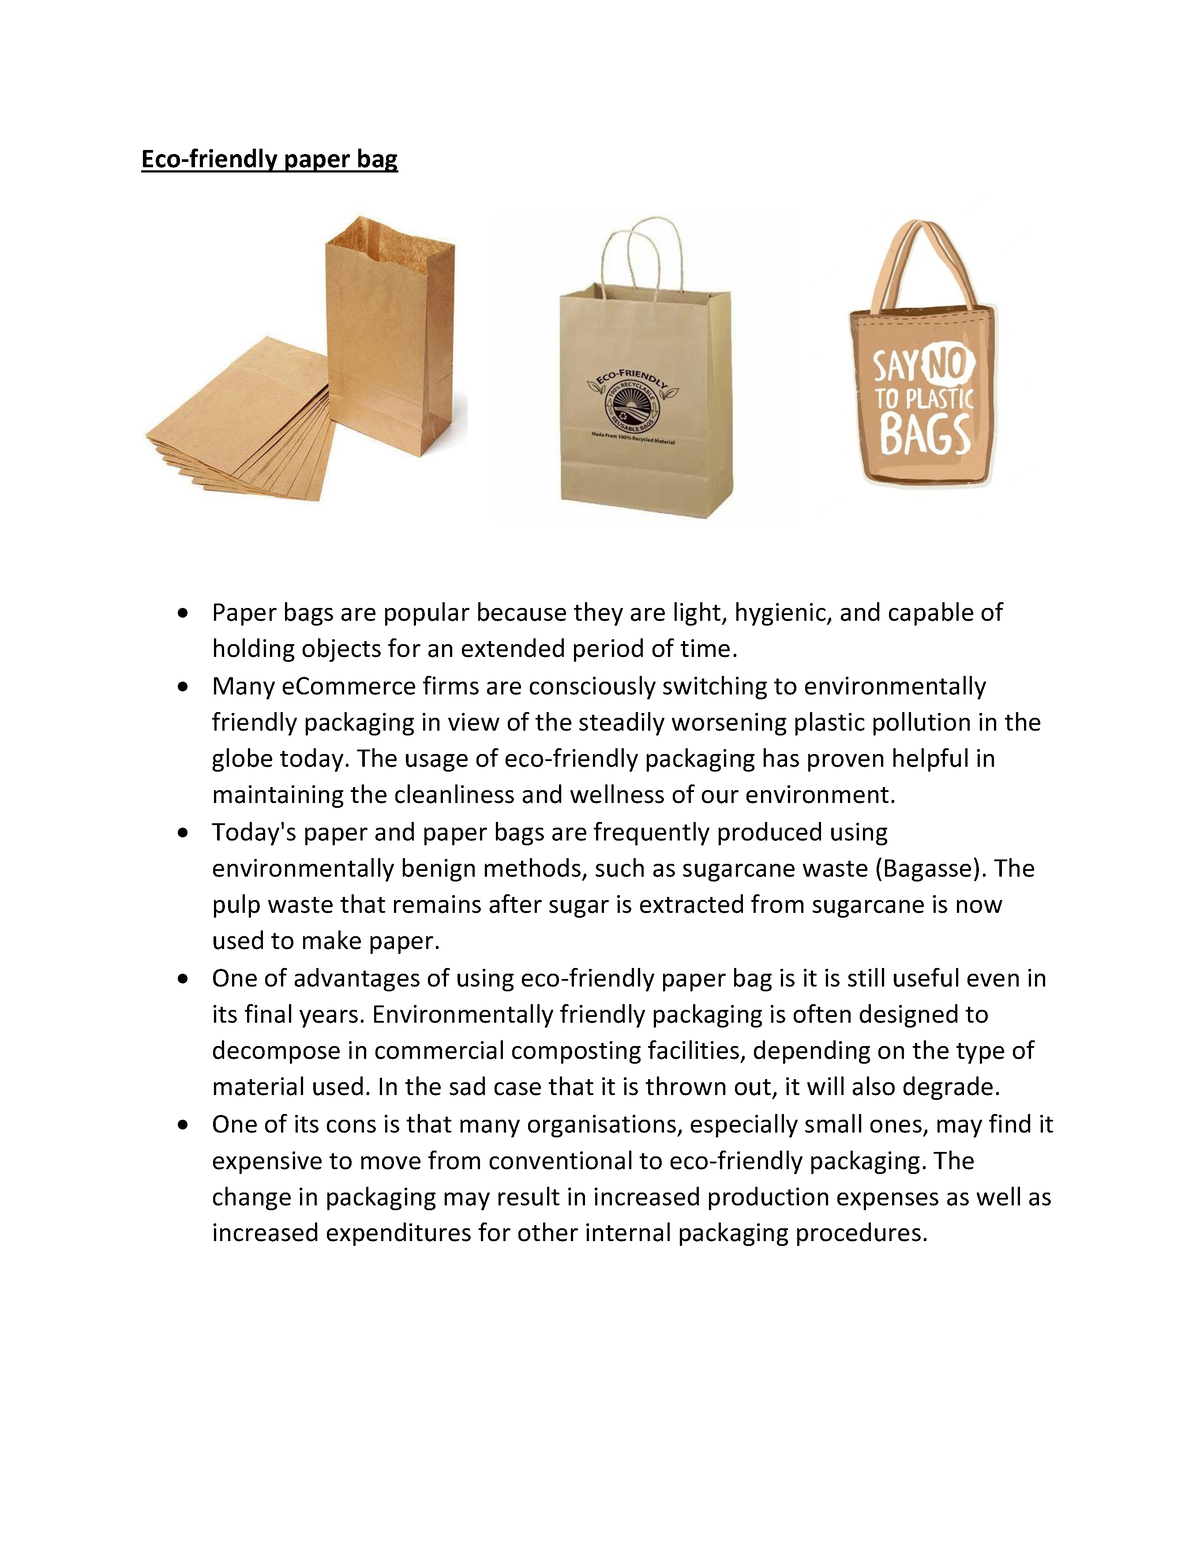 Recycled paper bags or recycled plastic bags? Which bags should businesses  choose to use? - BAO BÌ MINH SANG